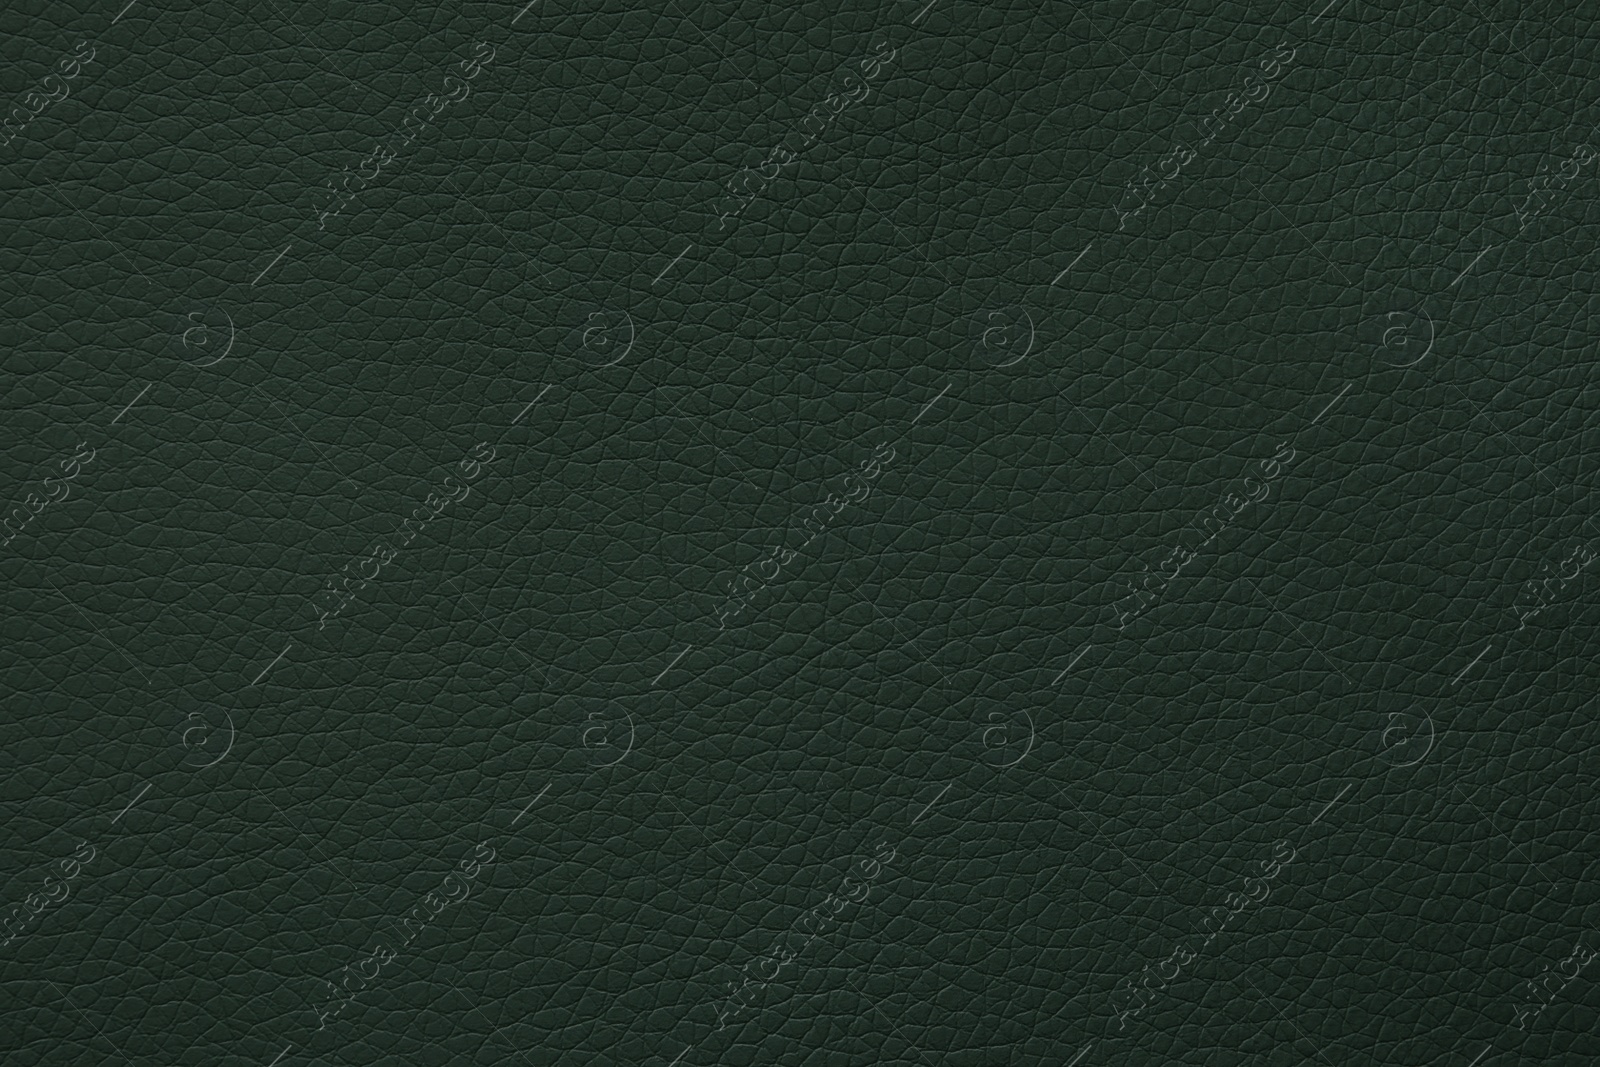 Photo of Texture of dark green leather as background, closeup